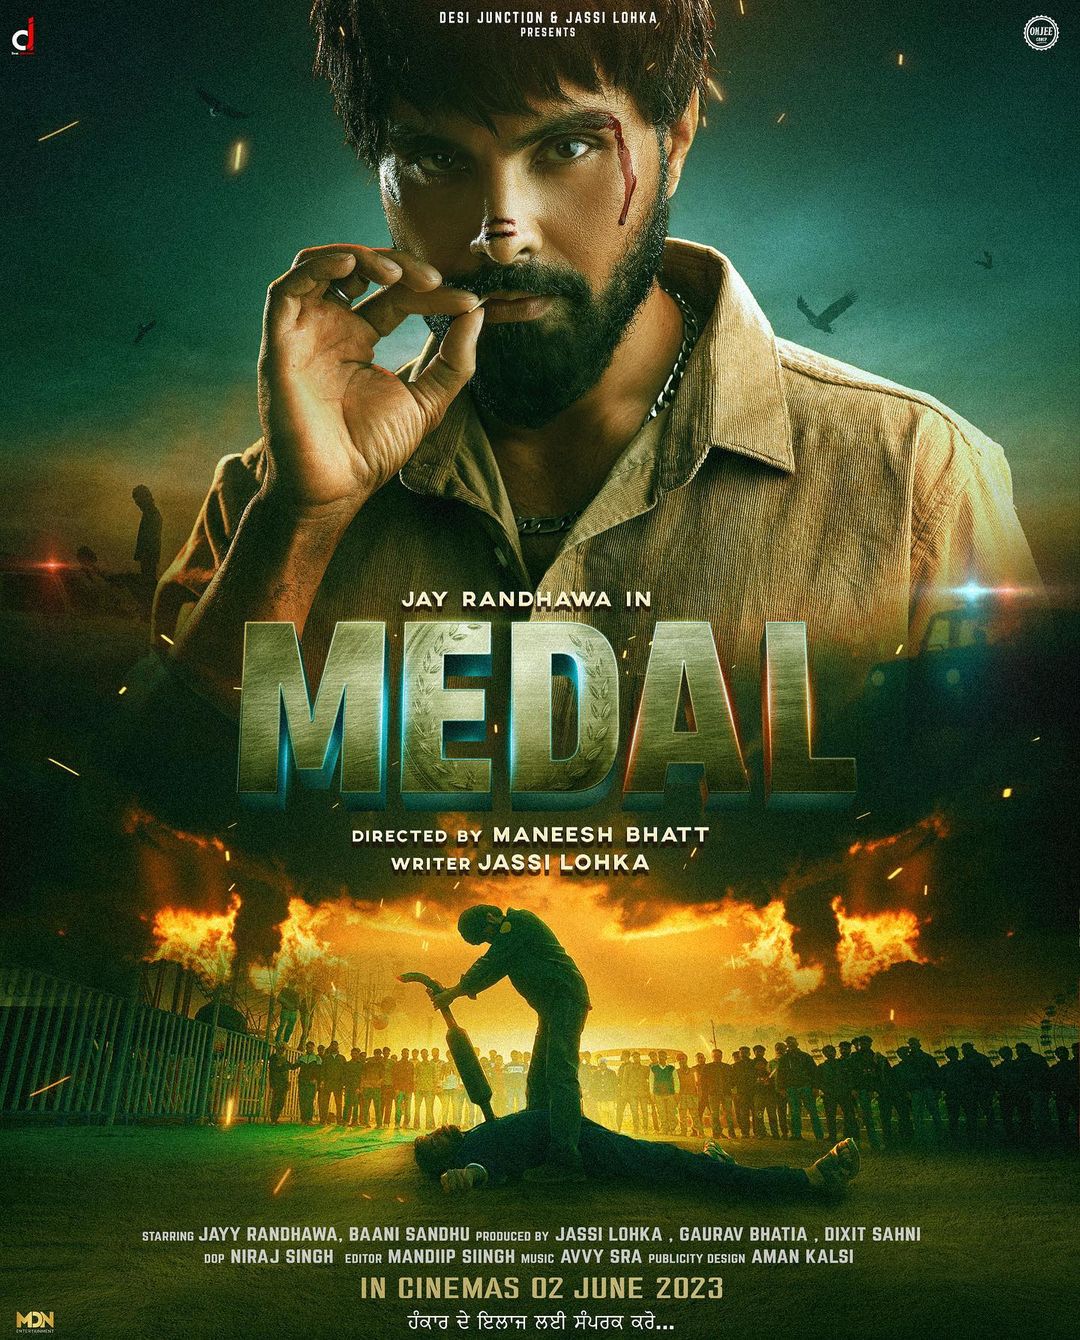 Medal Movie (2023) Cast, Release Date, Story, Budget, Collection, Poster, Trailer, Review